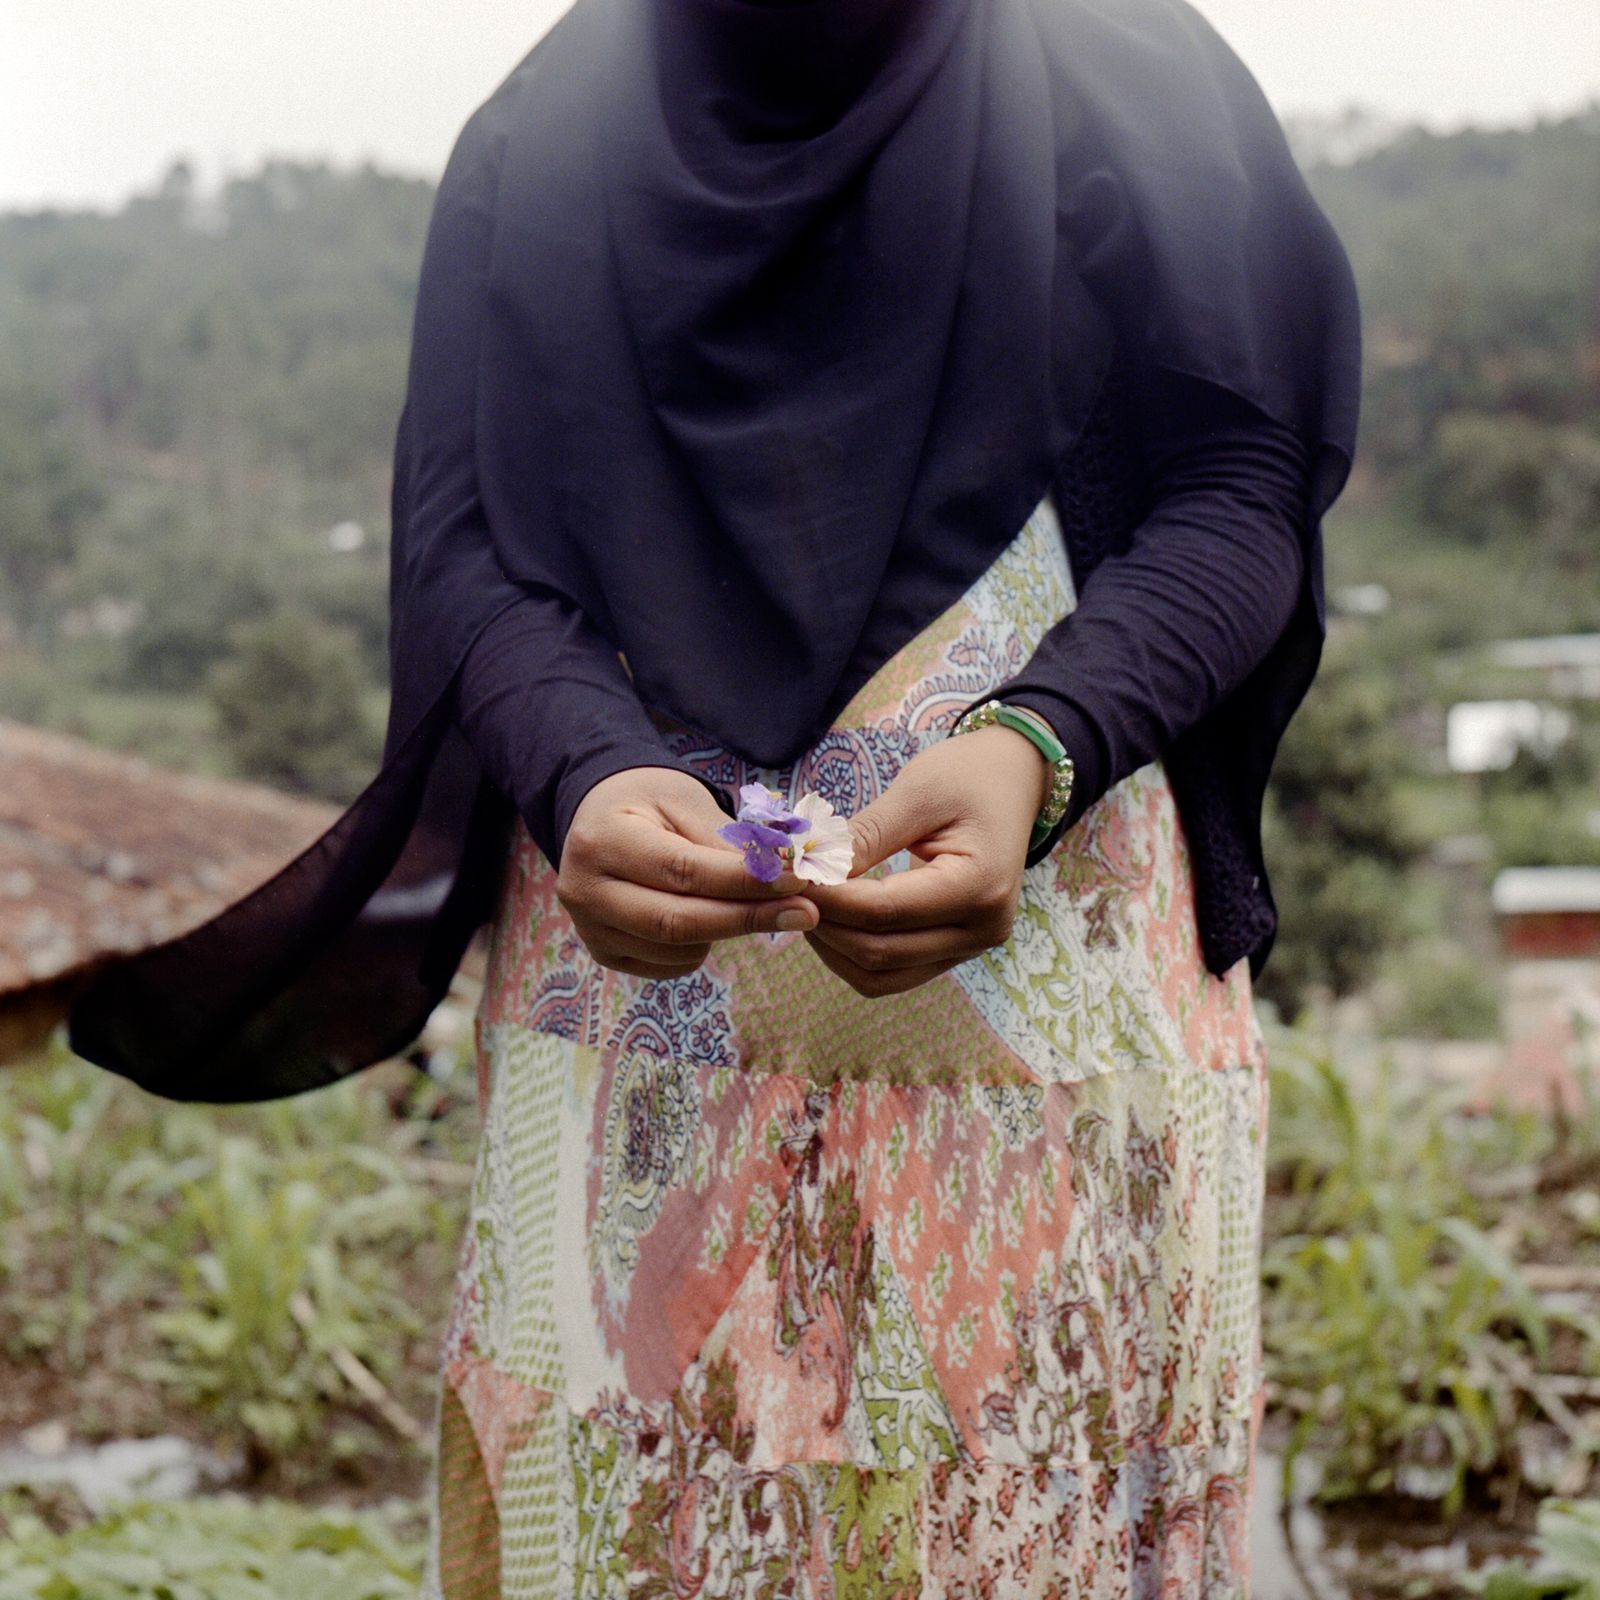 © Giulia Iacolutti - Image from the JANNAH photography project